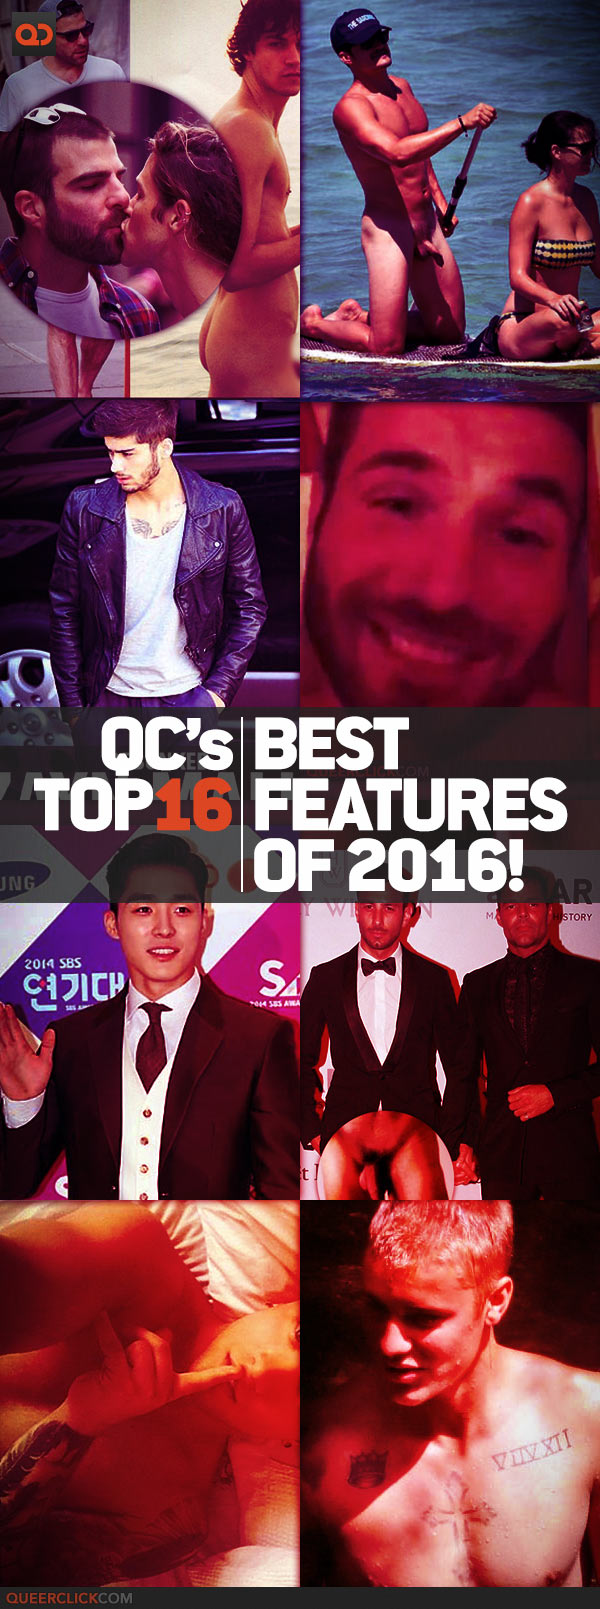 QC's Top 16 Best Features Of 2016!